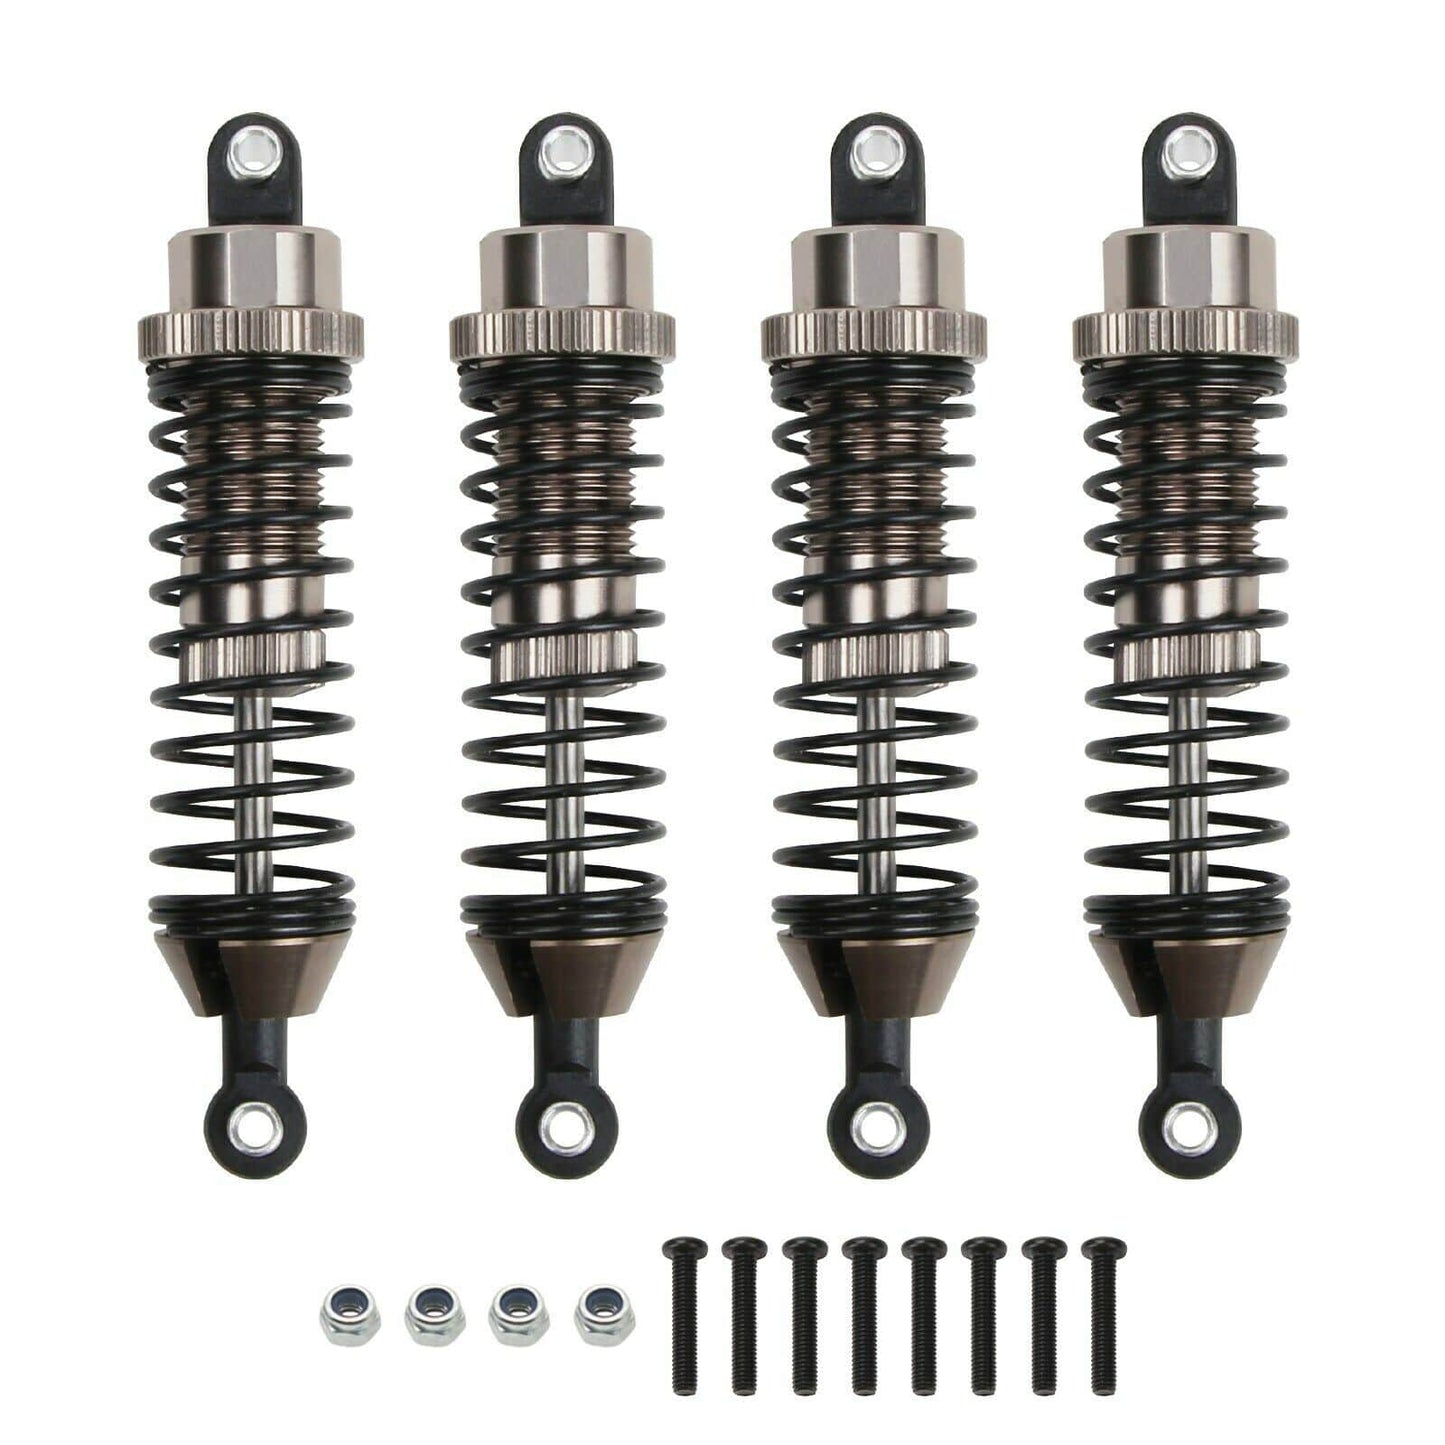 RCAWD REDCAT UPGRADE PARTS Ti RCAWD RCFront Rear Shock BS214-011 for 1/10 Redcat Racing Blackout SC XTE XBE PRO